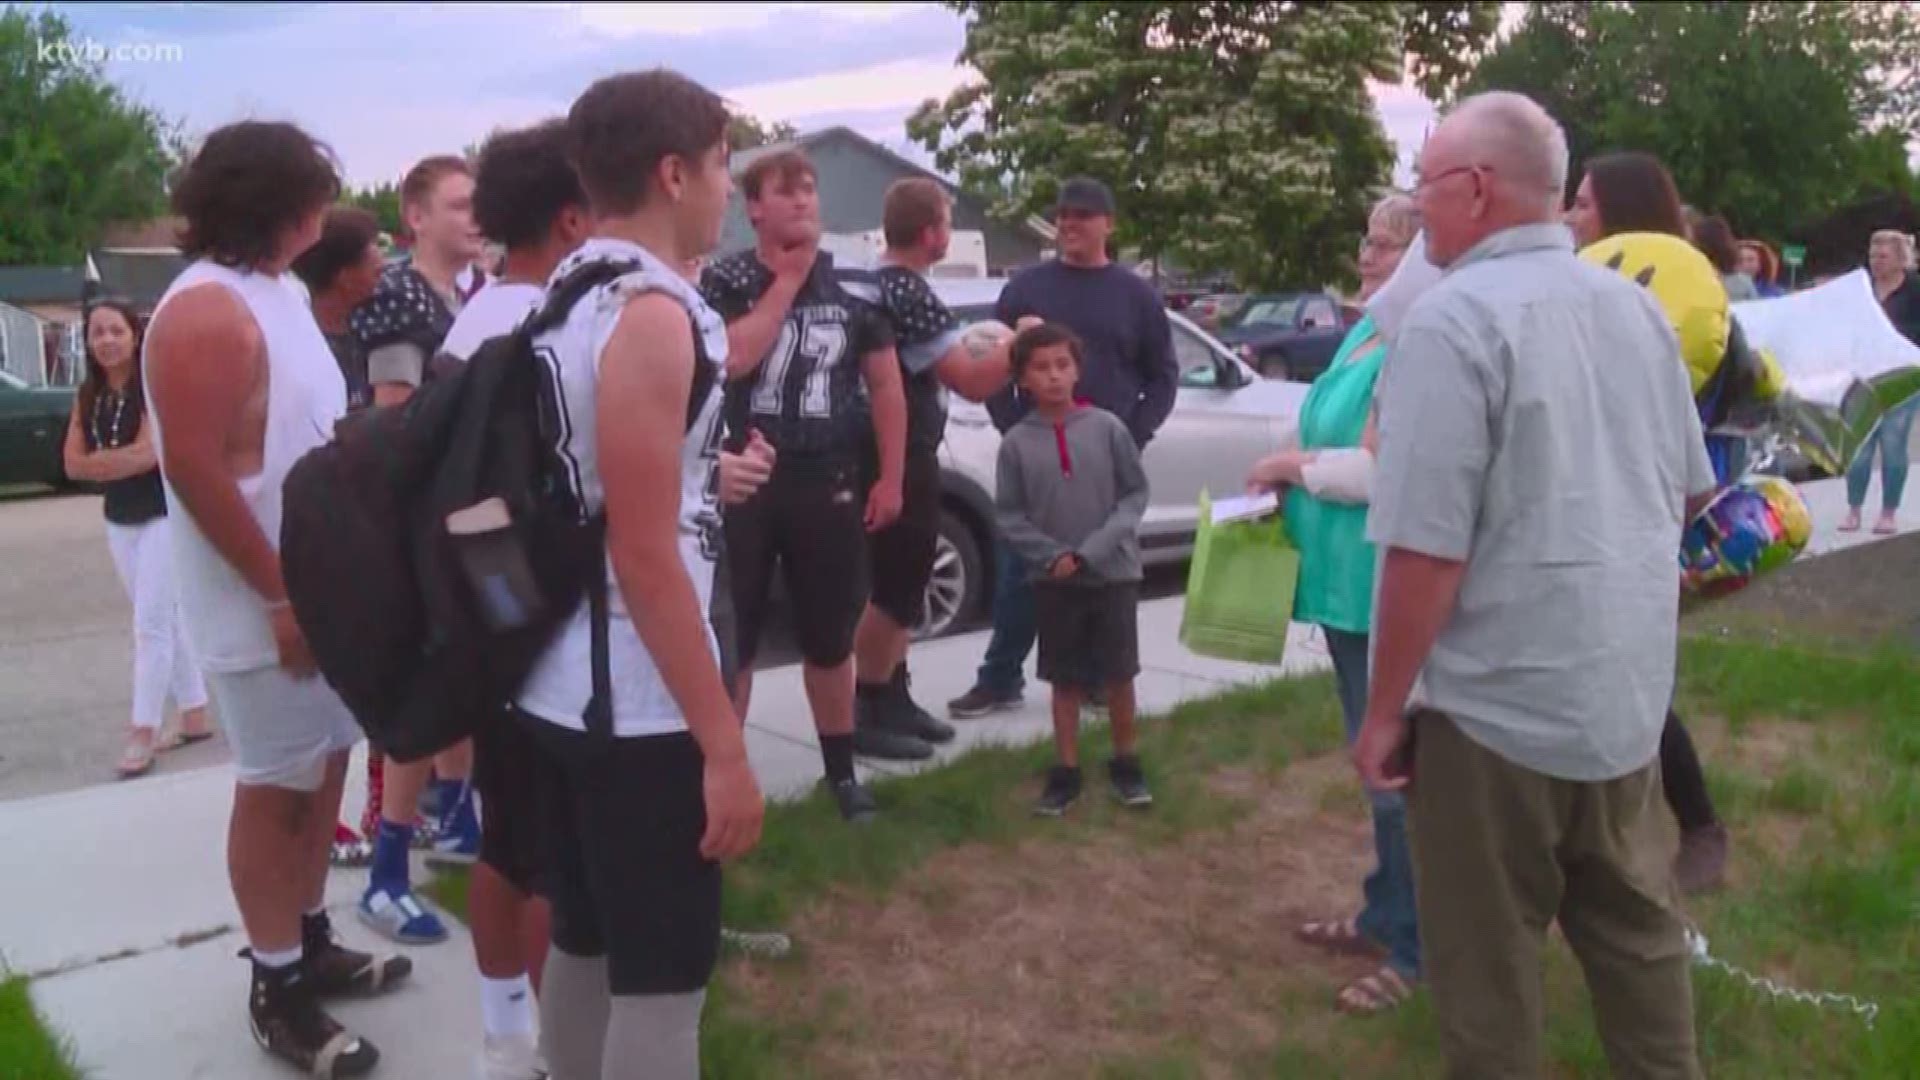 Boise Black Knights youth football players had an emotional reunion Thursday night with the couple they saved after a rollover crash.